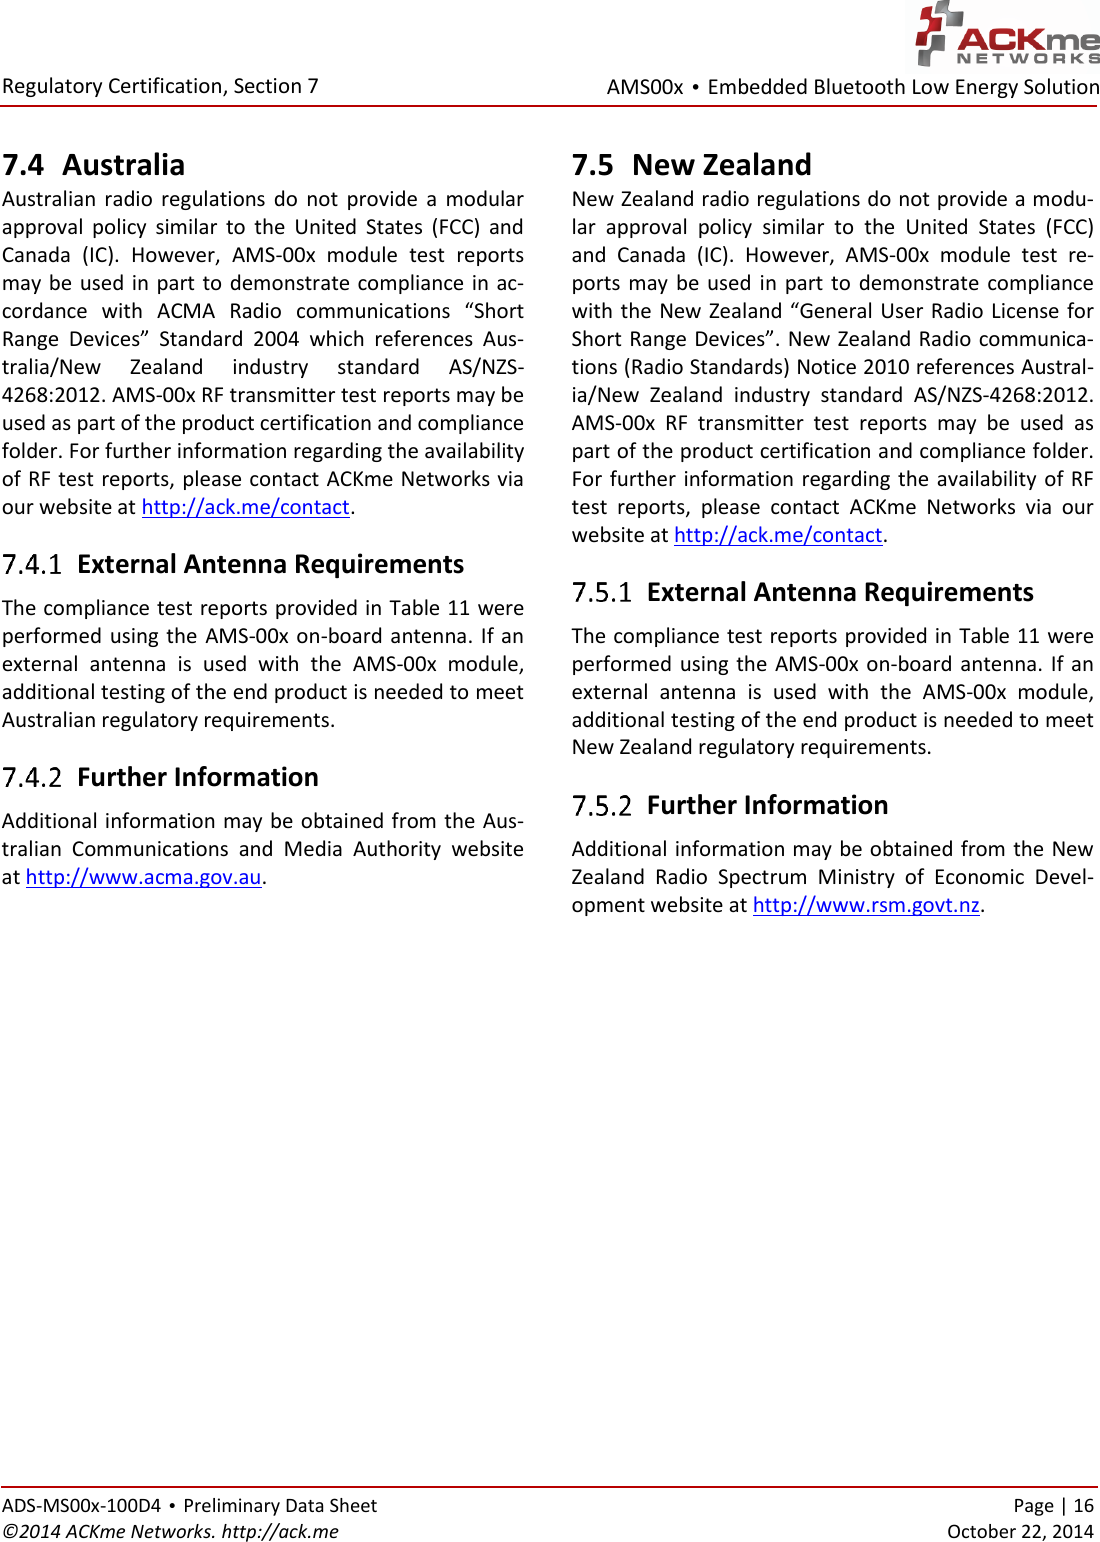 AMS00x • Embedded Bluetooth Low Energy Solution  Regulatory Certification, Section 7   ADS-MS00x-100D4 • Preliminary Data Sheet    Page | 16 ©2014 ACKme Networks. http://ack.me    October 22, 2014 7.4 Australia Australian  radio  regulations  do  not  provide  a  modular approval  policy  similar  to  the  United  States  (FCC)  and Canada  (IC).  However,  AMS-00x  module  test  reports may be used in  part to demonstrate compliance in ac-cordance  with  ACMA  Radio  communications  “Short Range  Devices”  Standard  2004  which  references  Aus-tralia/New  Zealand  industry  standard  AS/NZS-4268:2012. AMS-00x RF transmitter test reports may be used as part of the product certification and compliance folder. For further information regarding the availability of RF test reports, please contact ACKme Networks via our website at http://ack.me/contact.  External Antenna Requirements The compliance test reports provided in Table 11 were performed using the AMS-00x on-board antenna. If an external  antenna  is  used  with  the  AMS-00x  module, additional testing of the end product is needed to meet Australian regulatory requirements.  Further Information Additional information may be obtained from the Aus-tralian  Communications  and  Media  Authority  website at http://www.acma.gov.au. 7.5 New Zealand New Zealand radio regulations do not provide a modu-lar  approval  policy  similar  to  the  United  States  (FCC) and  Canada  (IC).  However,  AMS-00x  module  test  re-ports  may  be  used  in part  to  demonstrate  compliance with the New Zealand “General User Radio License for Short Range Devices”. New Zealand Radio communica-tions (Radio Standards) Notice 2010 references Austral-ia/New  Zealand  industry  standard  AS/NZS-4268:2012. AMS-00x  RF  transmitter  test  reports  may  be  used  as part of the product certification and compliance folder. For further information regarding the availability of RF test  reports,  please  contact  ACKme  Networks  via  our website at http://ack.me/contact.  External Antenna Requirements The compliance test reports provided in Table 11 were performed using the AMS-00x on-board antenna. If an external  antenna  is  used  with  the  AMS-00x  module, additional testing of the end product is needed to meet New Zealand regulatory requirements.  Further Information Additional information may be obtained from the New Zealand  Radio  Spectrum  Ministry  of  Economic  Devel-opment website at http://www.rsm.govt.nz.     